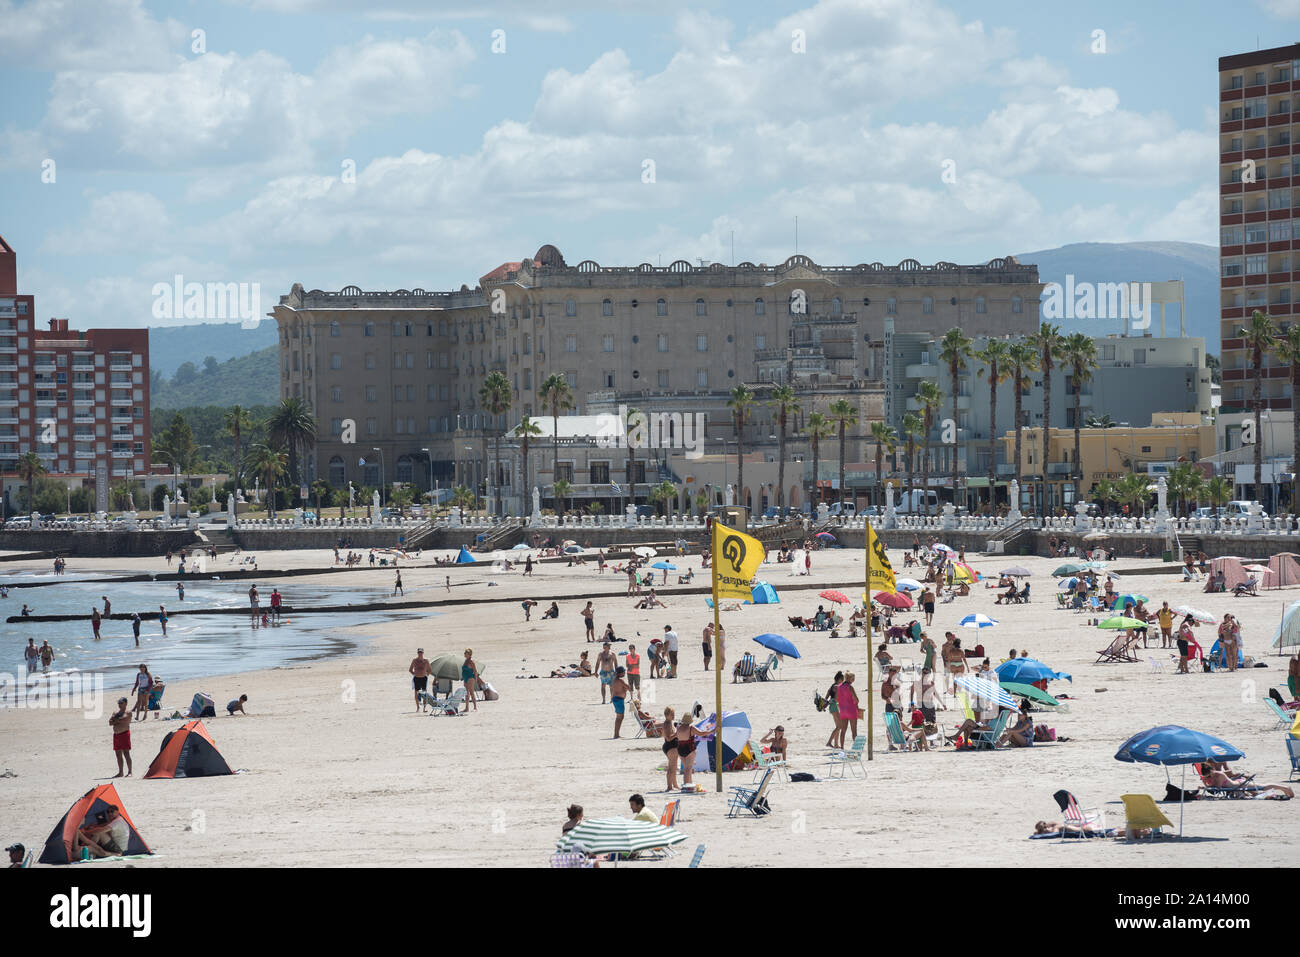 Piriapolis, Uruguay - March 4 2016: The main beach of the city and the Argentino hotel on the background. Stock Photo